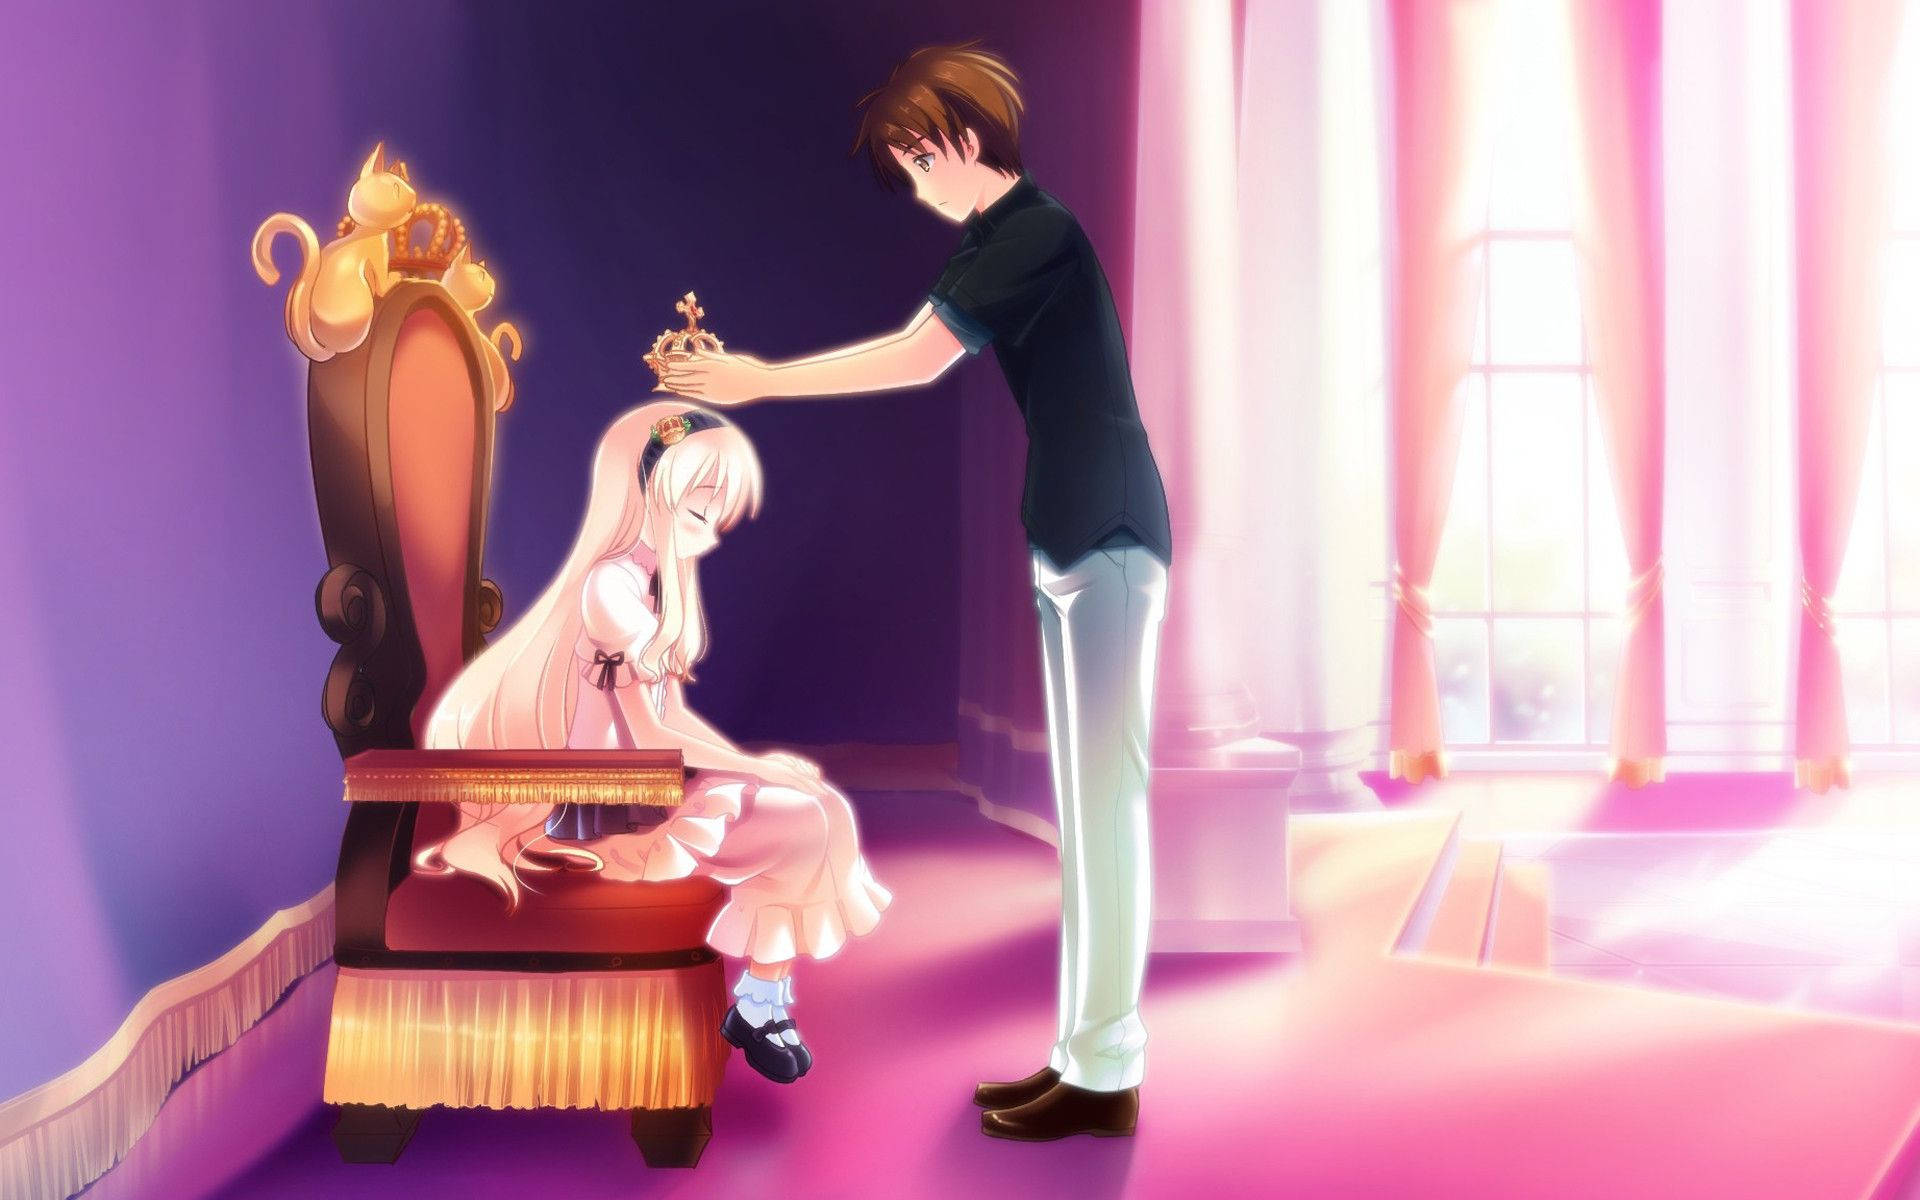 Man Crowning Woman Love Anime Background